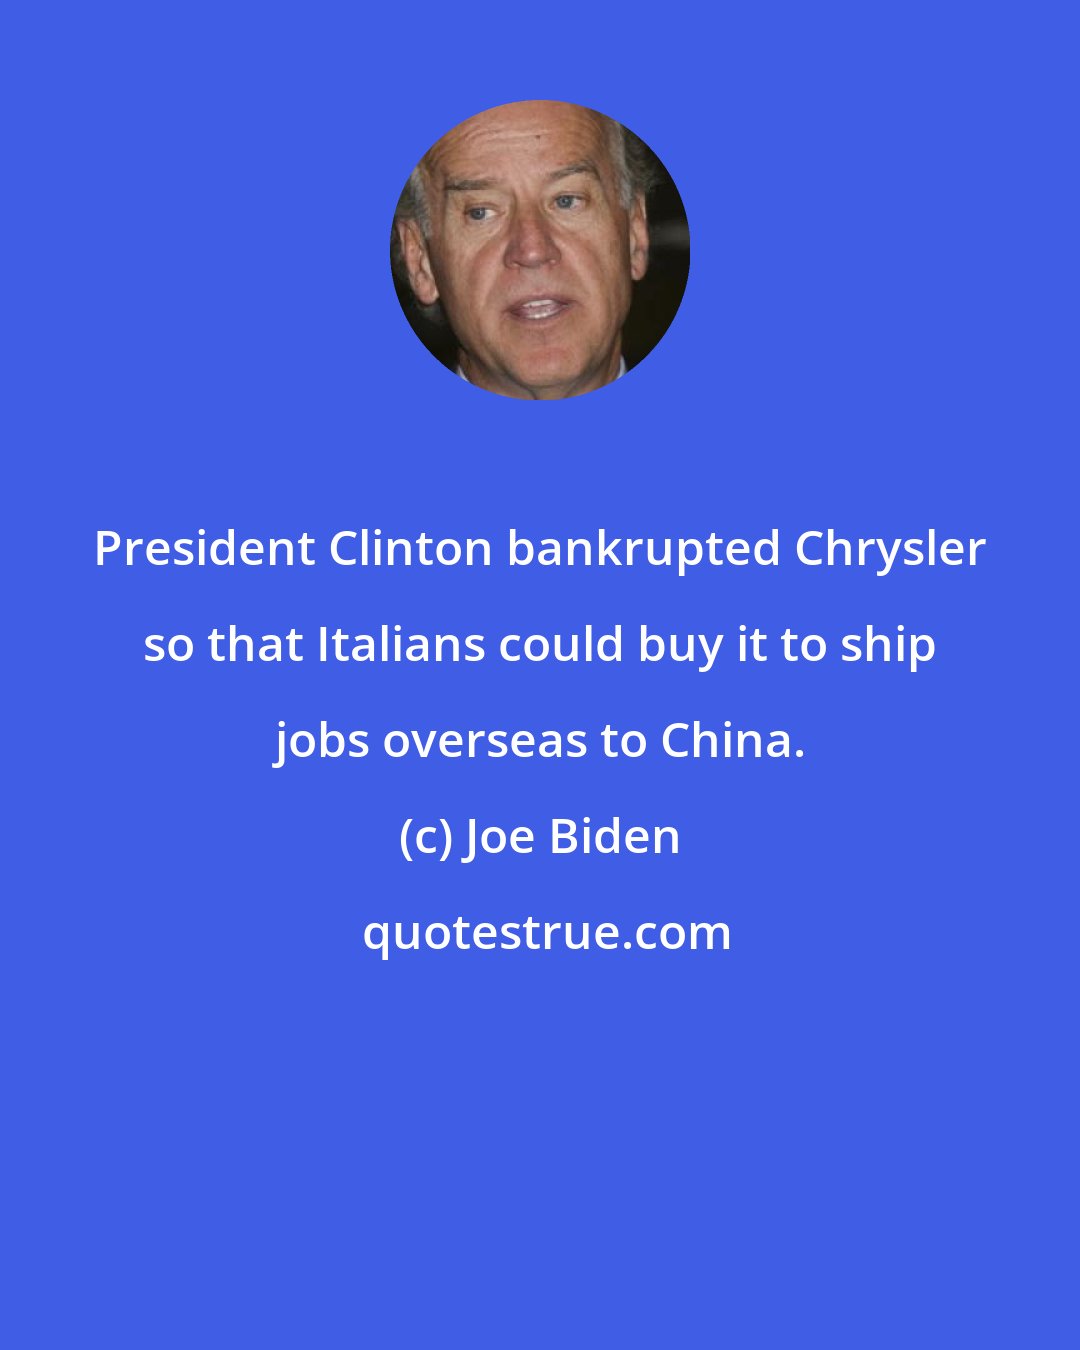 Joe Biden: President Clinton bankrupted Chrysler so that Italians could buy it to ship jobs overseas to China.